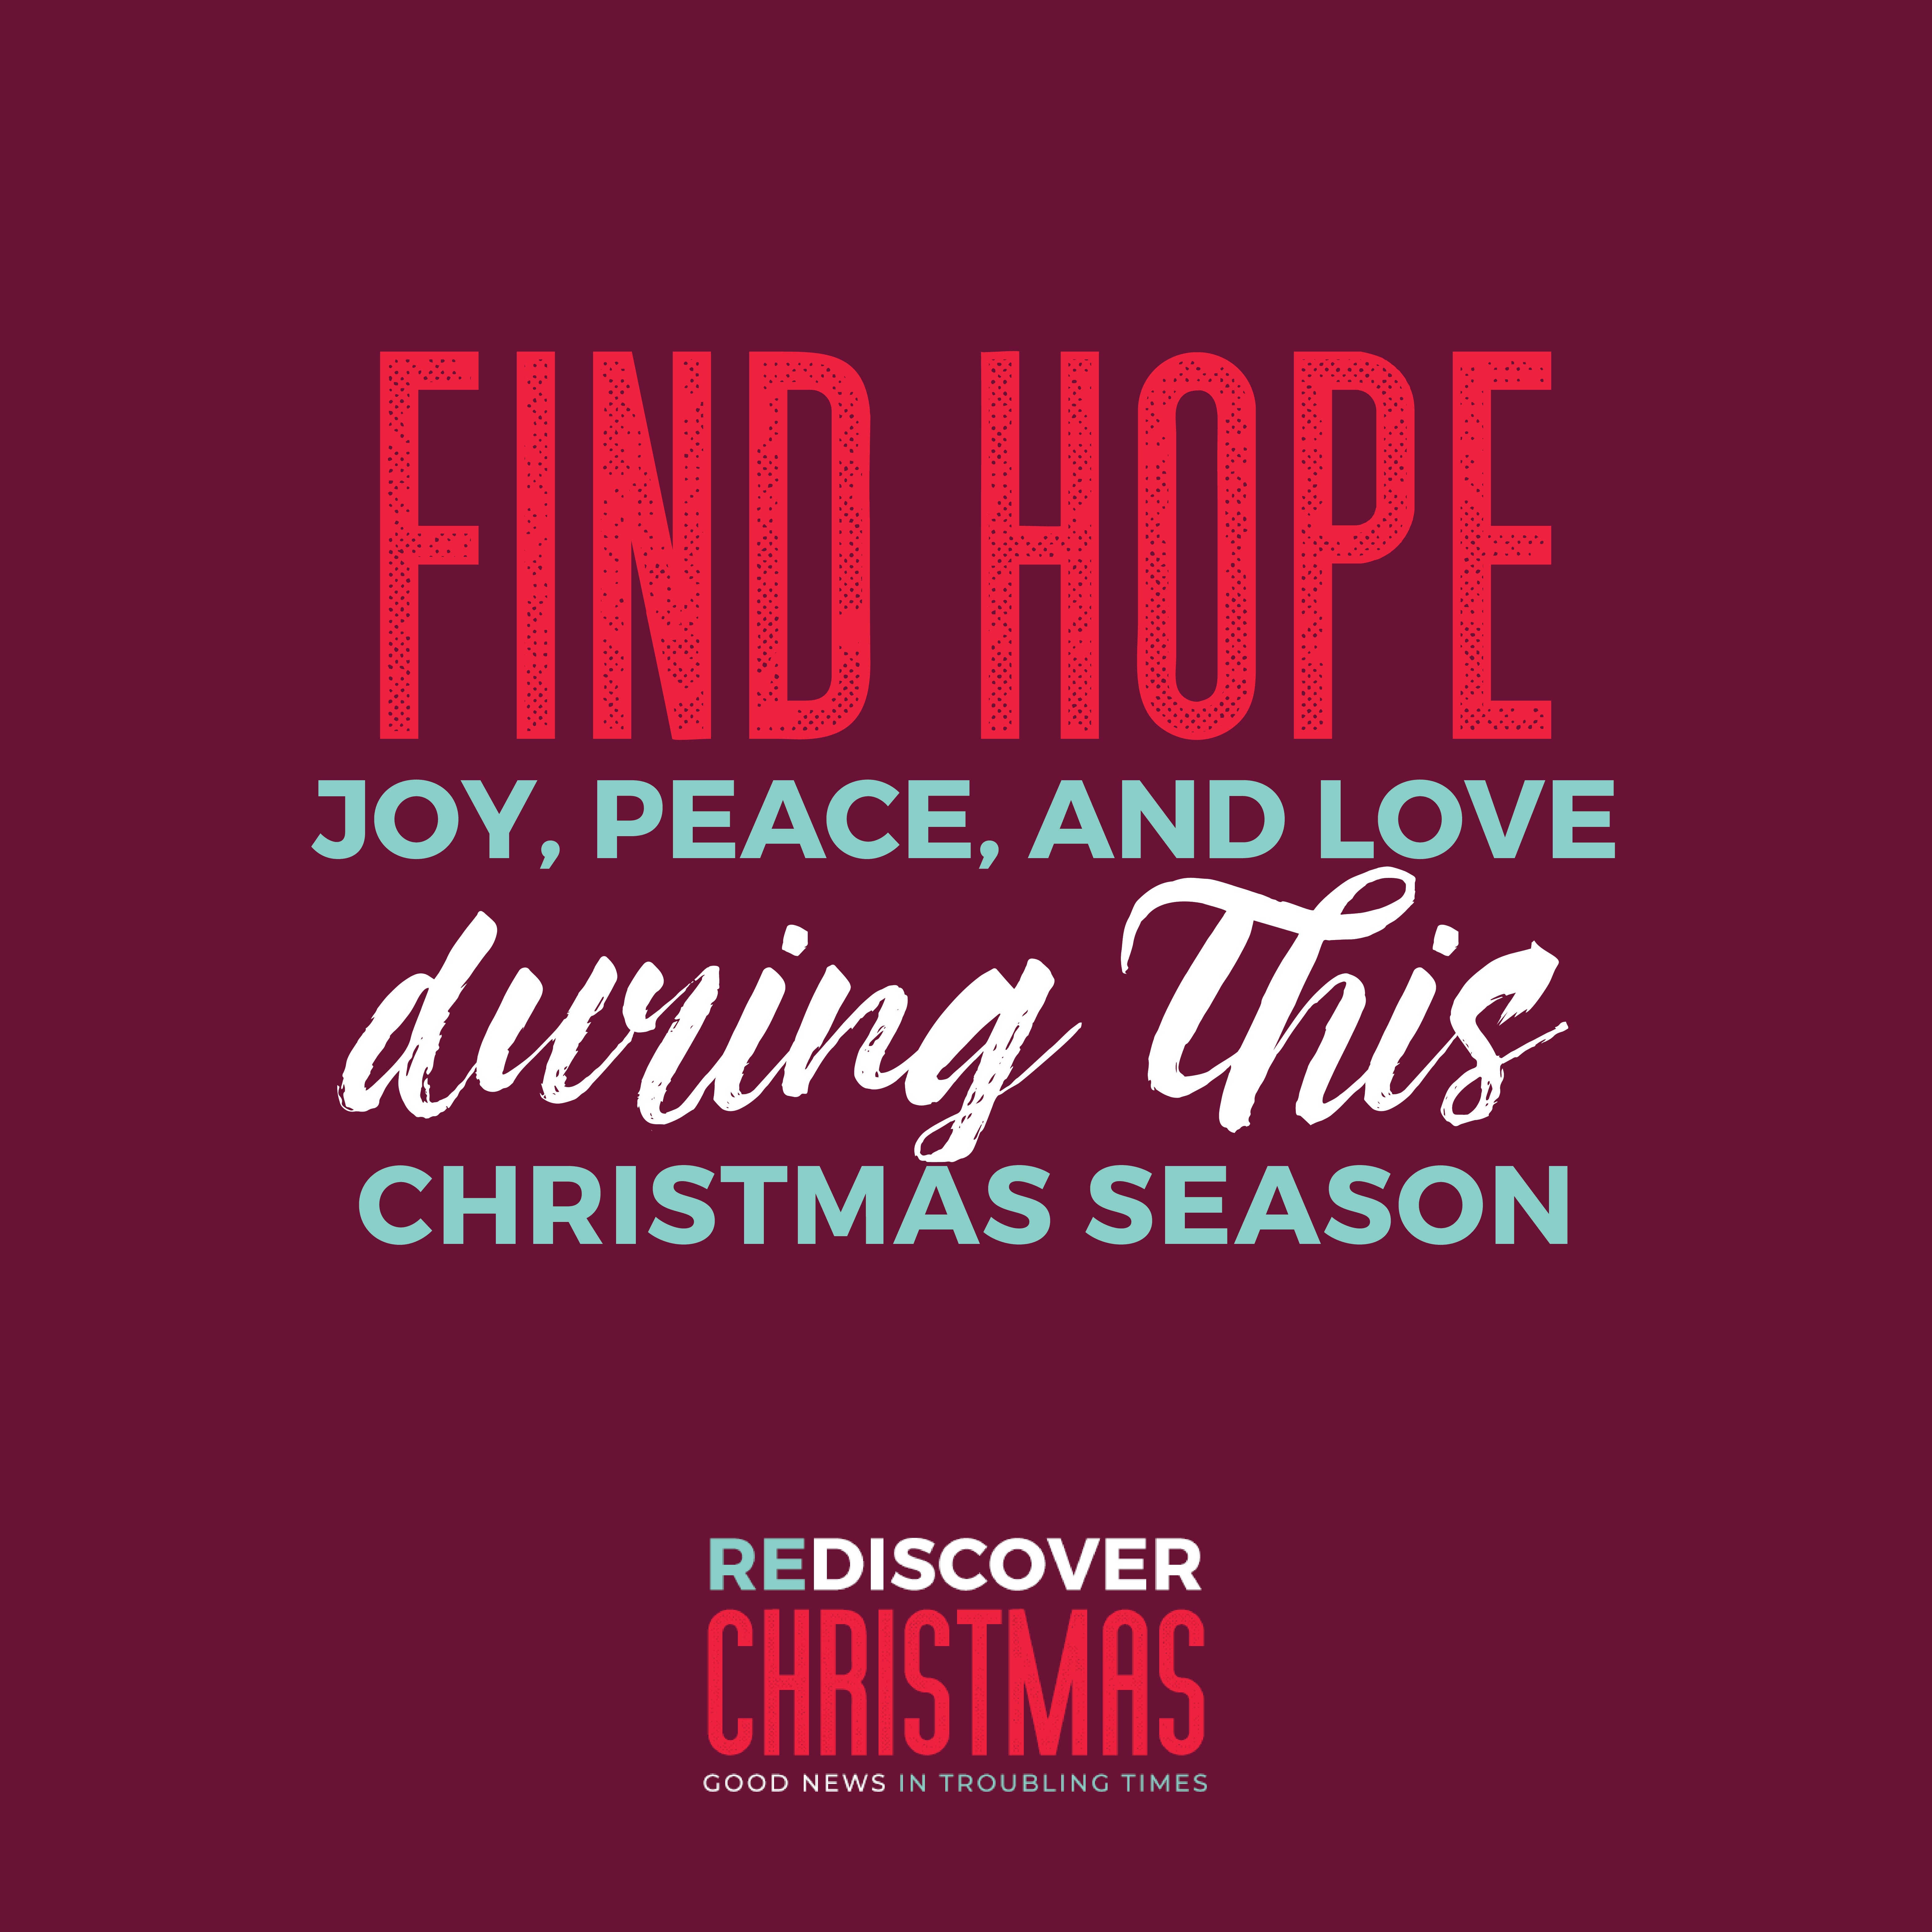 Re-Discover Hope